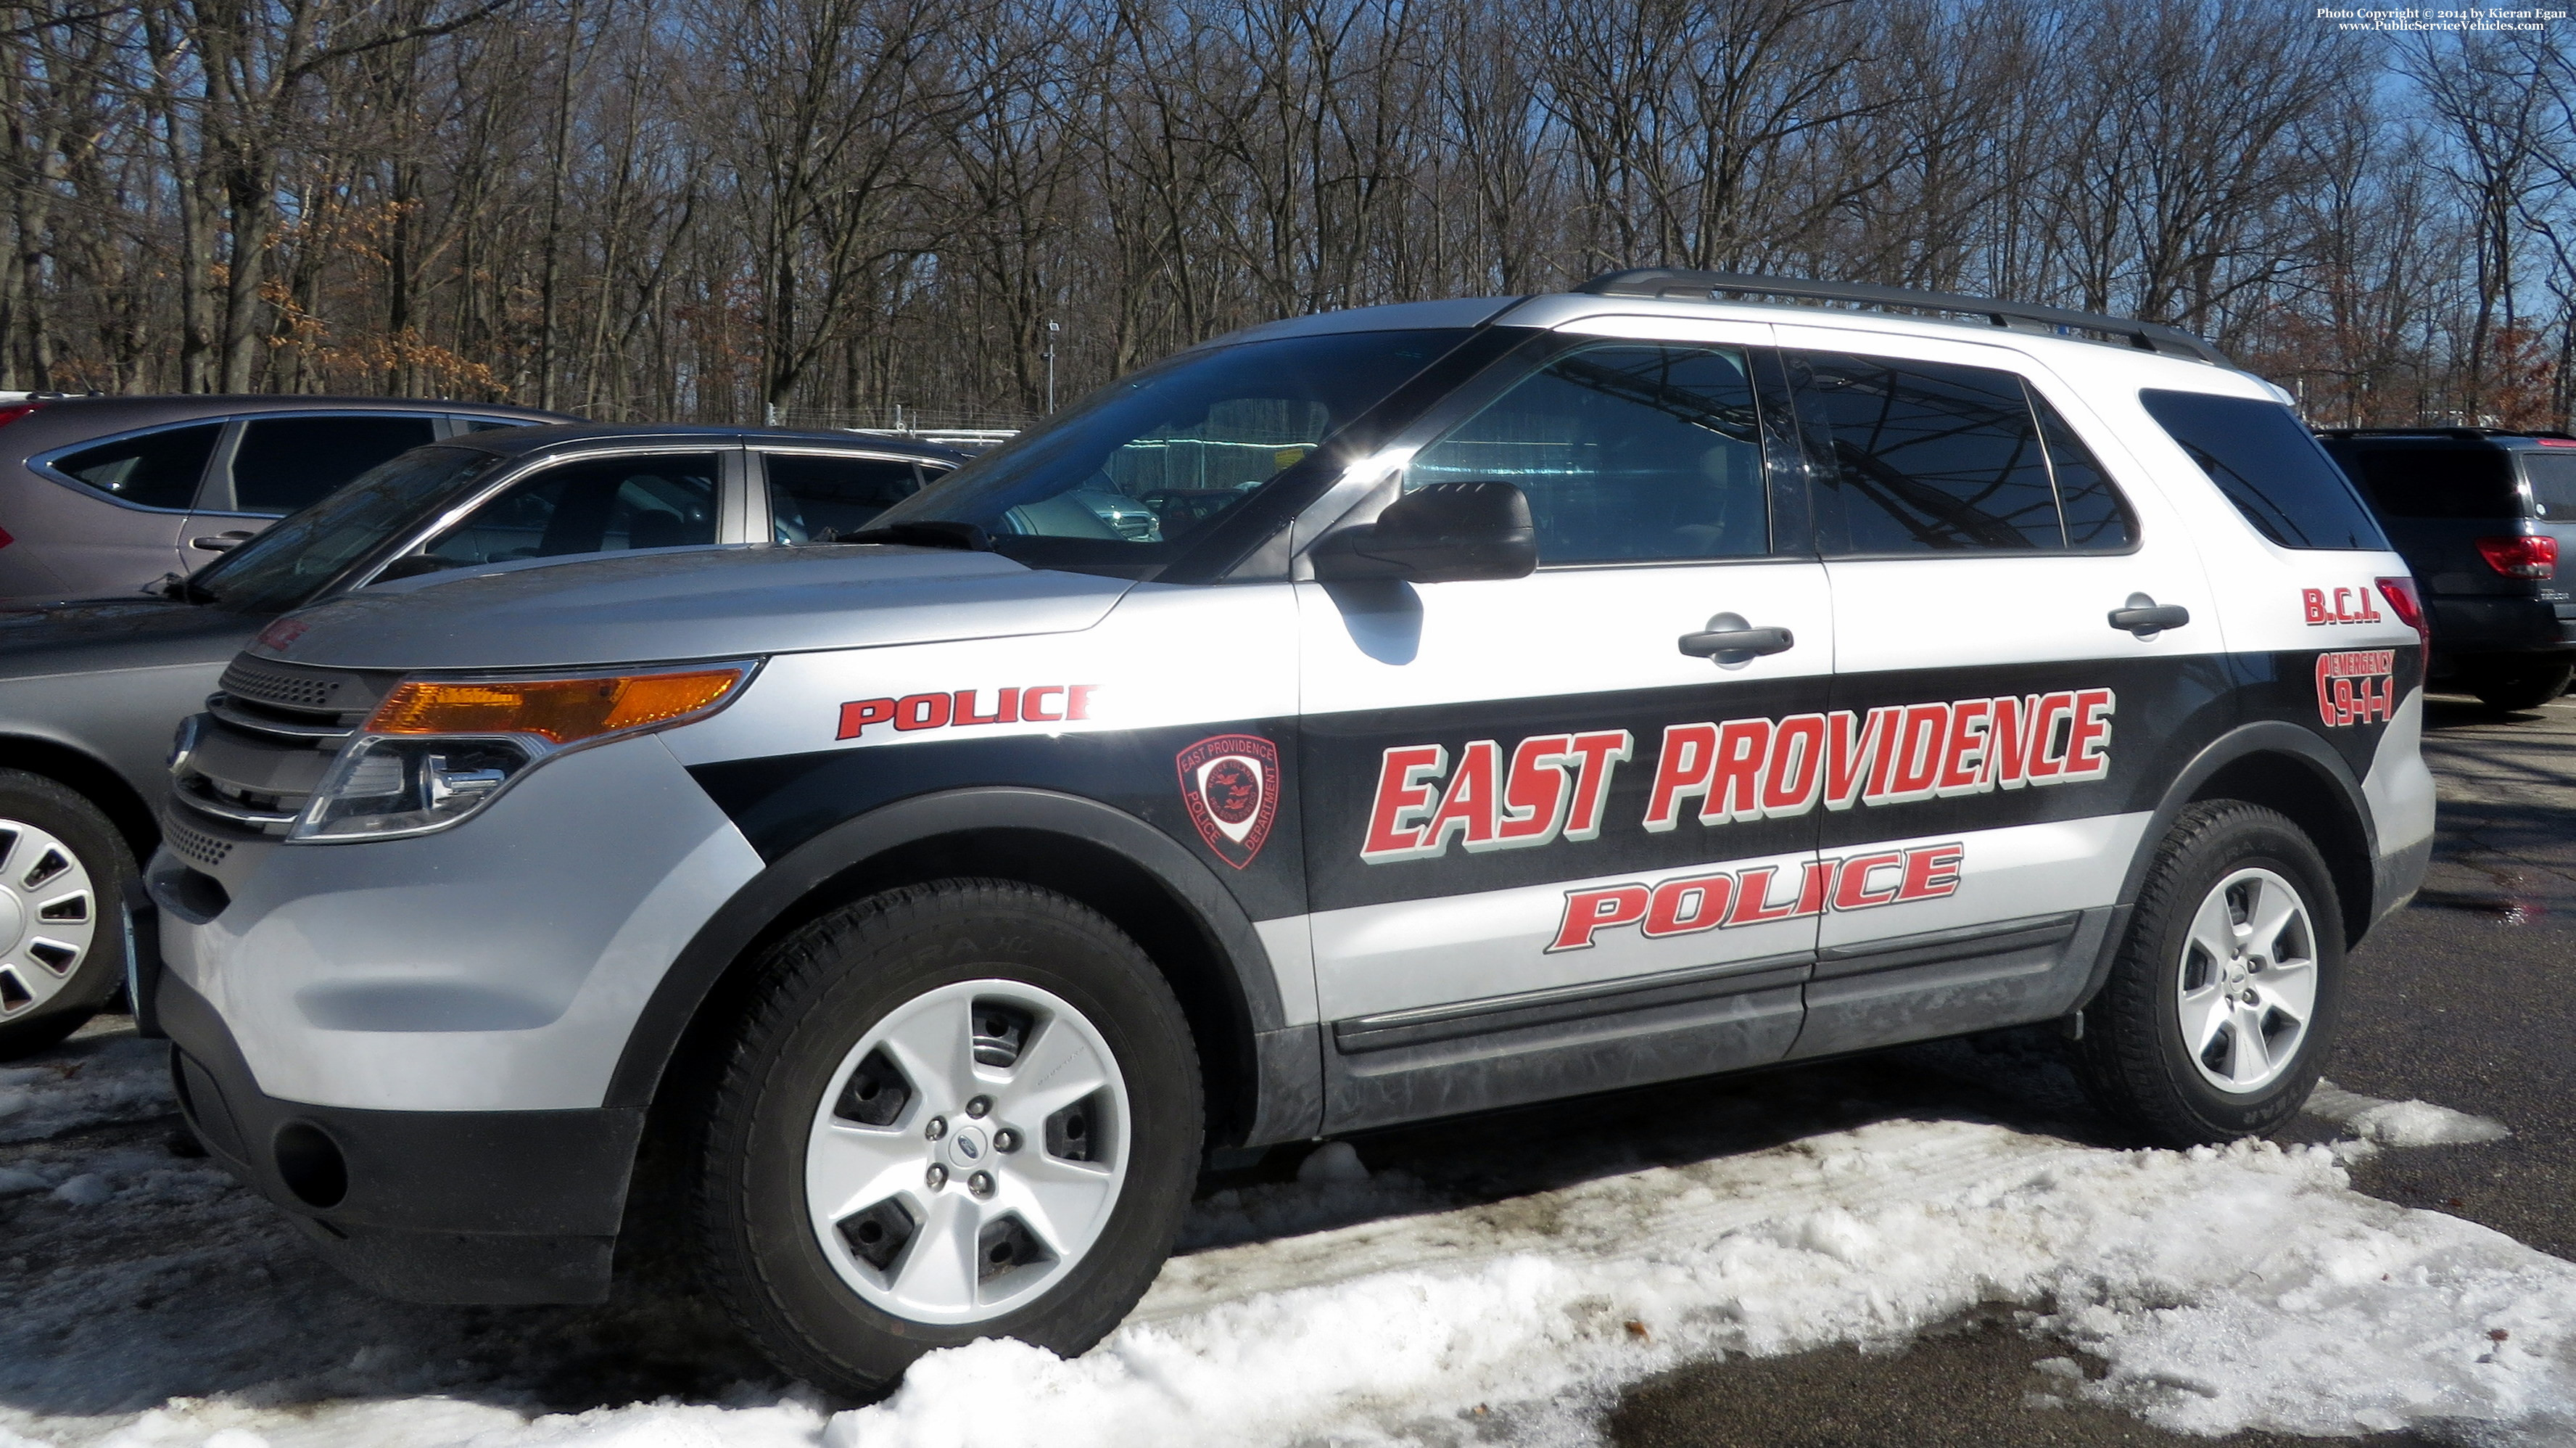 A photo  of East Providence Police
            BCI Unit, a 2012 Ford Explorer             taken by Kieran Egan